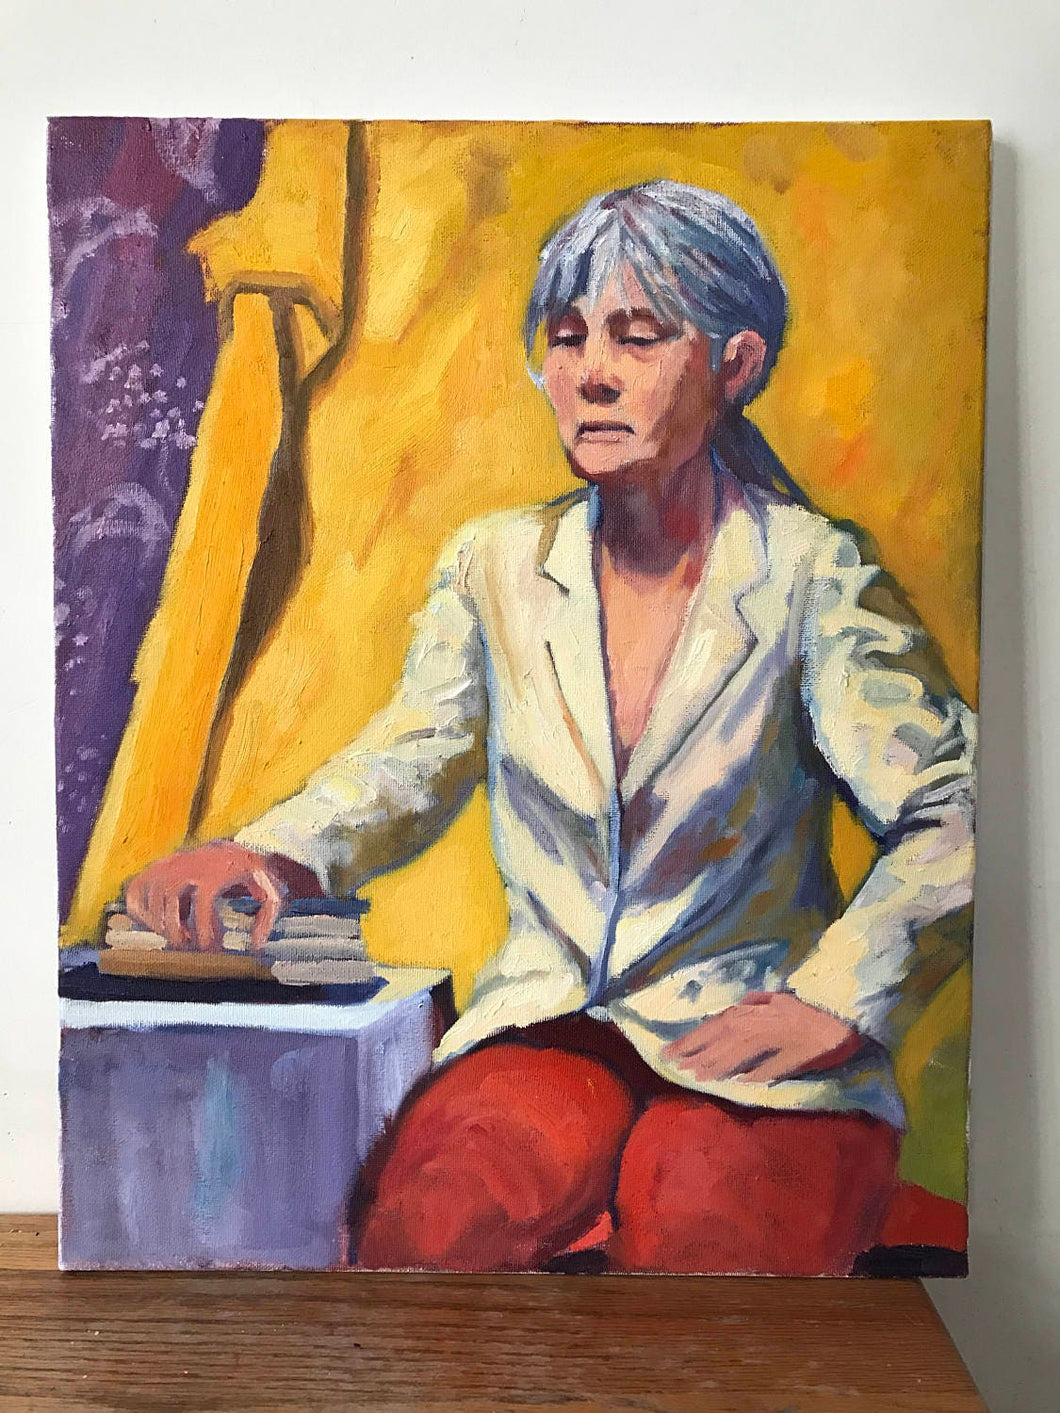 Original portrait painting on canvas, oil painting from life, allaprima portraiture, life painting original artwork, woman in a whiye jacket